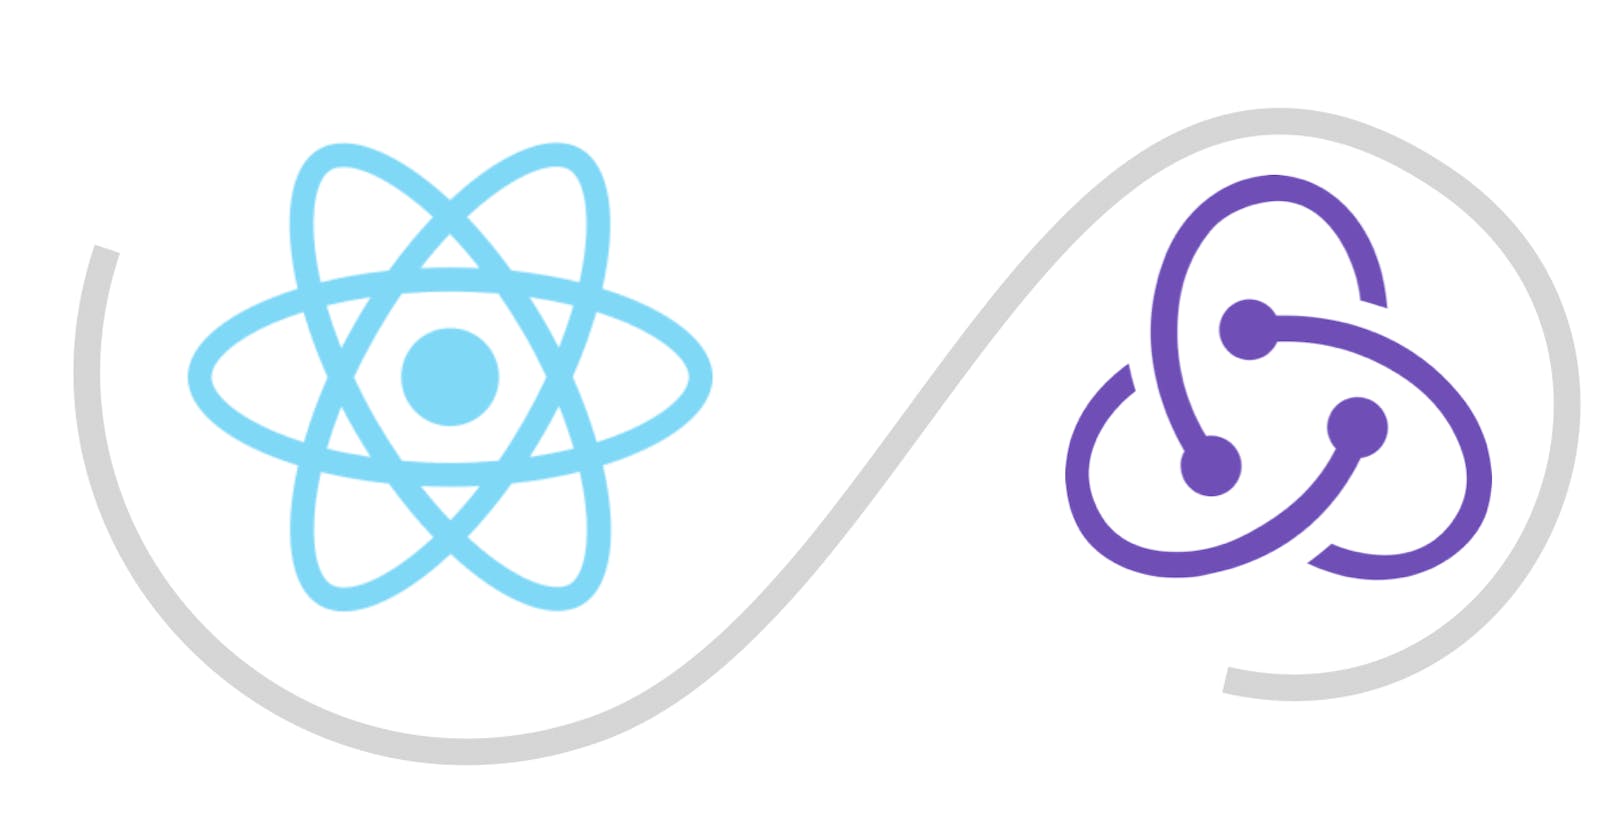 Configuring useReducer with redux-devtools and thunk actions.